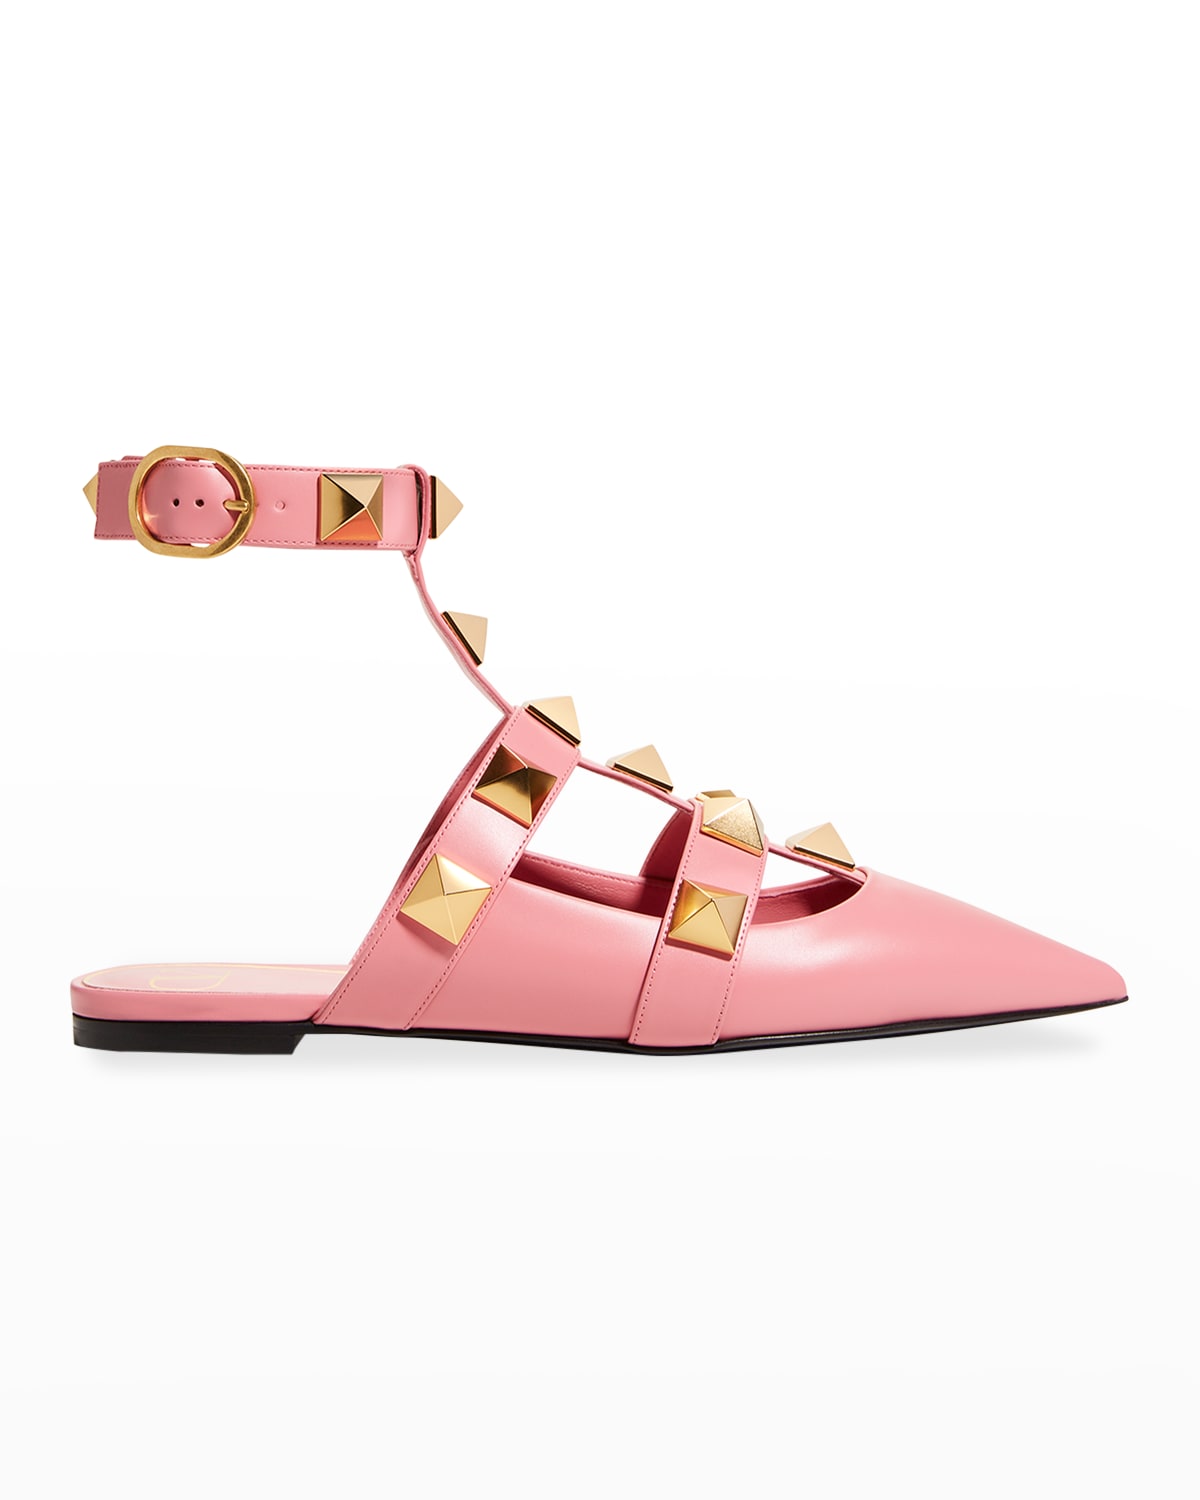 Valentino Pink Shoes | Neiman Marcus